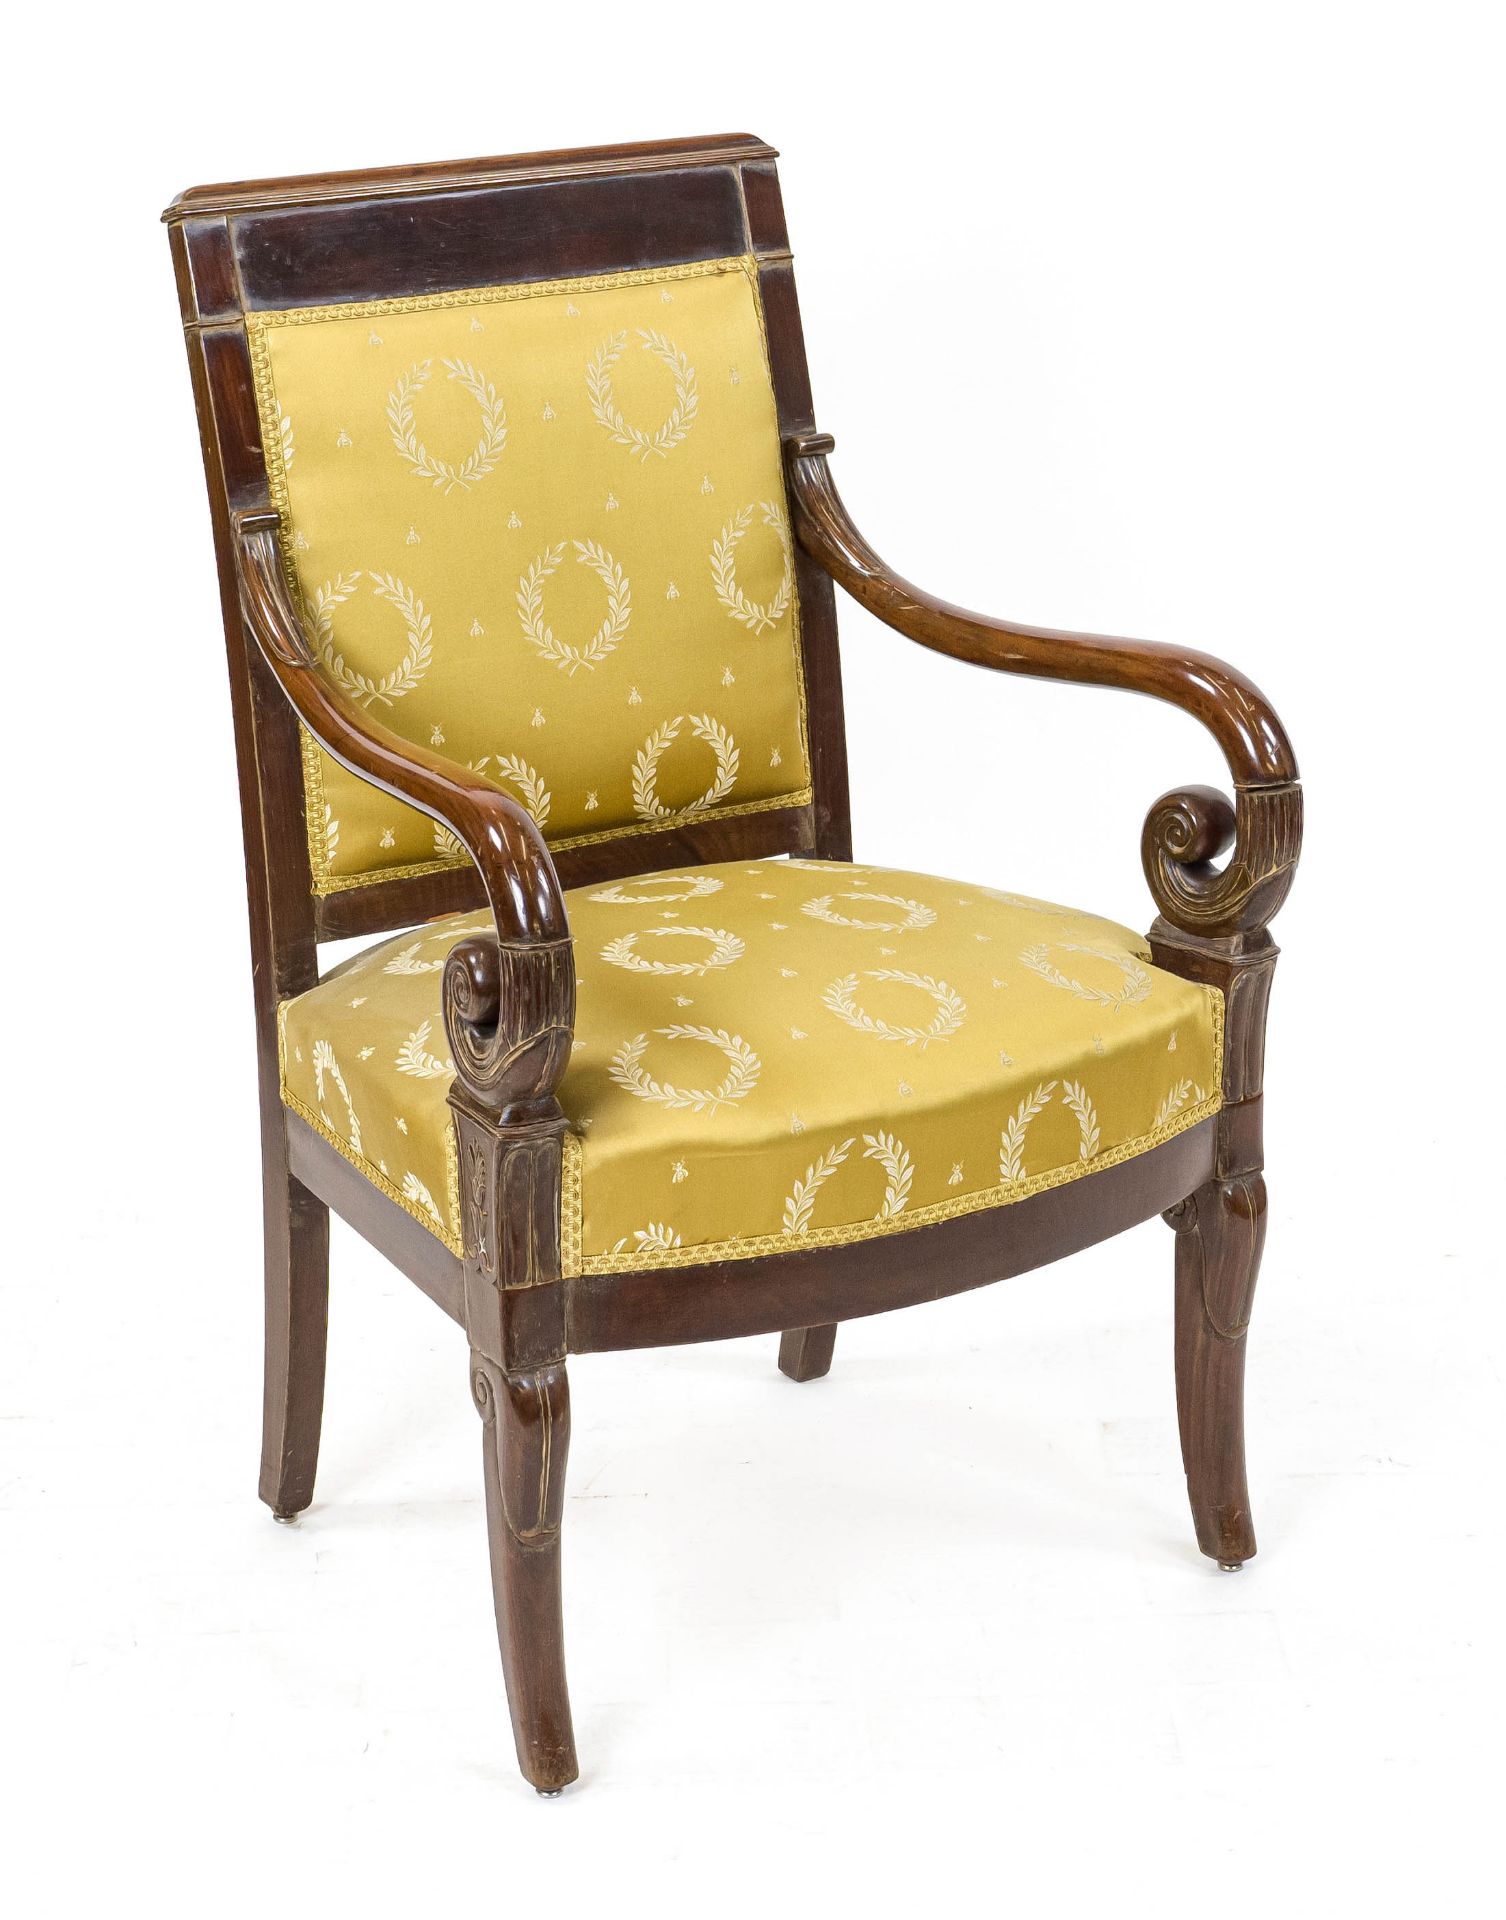 Empire armchair c. 1820, mahogany, partly carved, yellow upholstery, 95 x 63 x 50 cm - The furniture